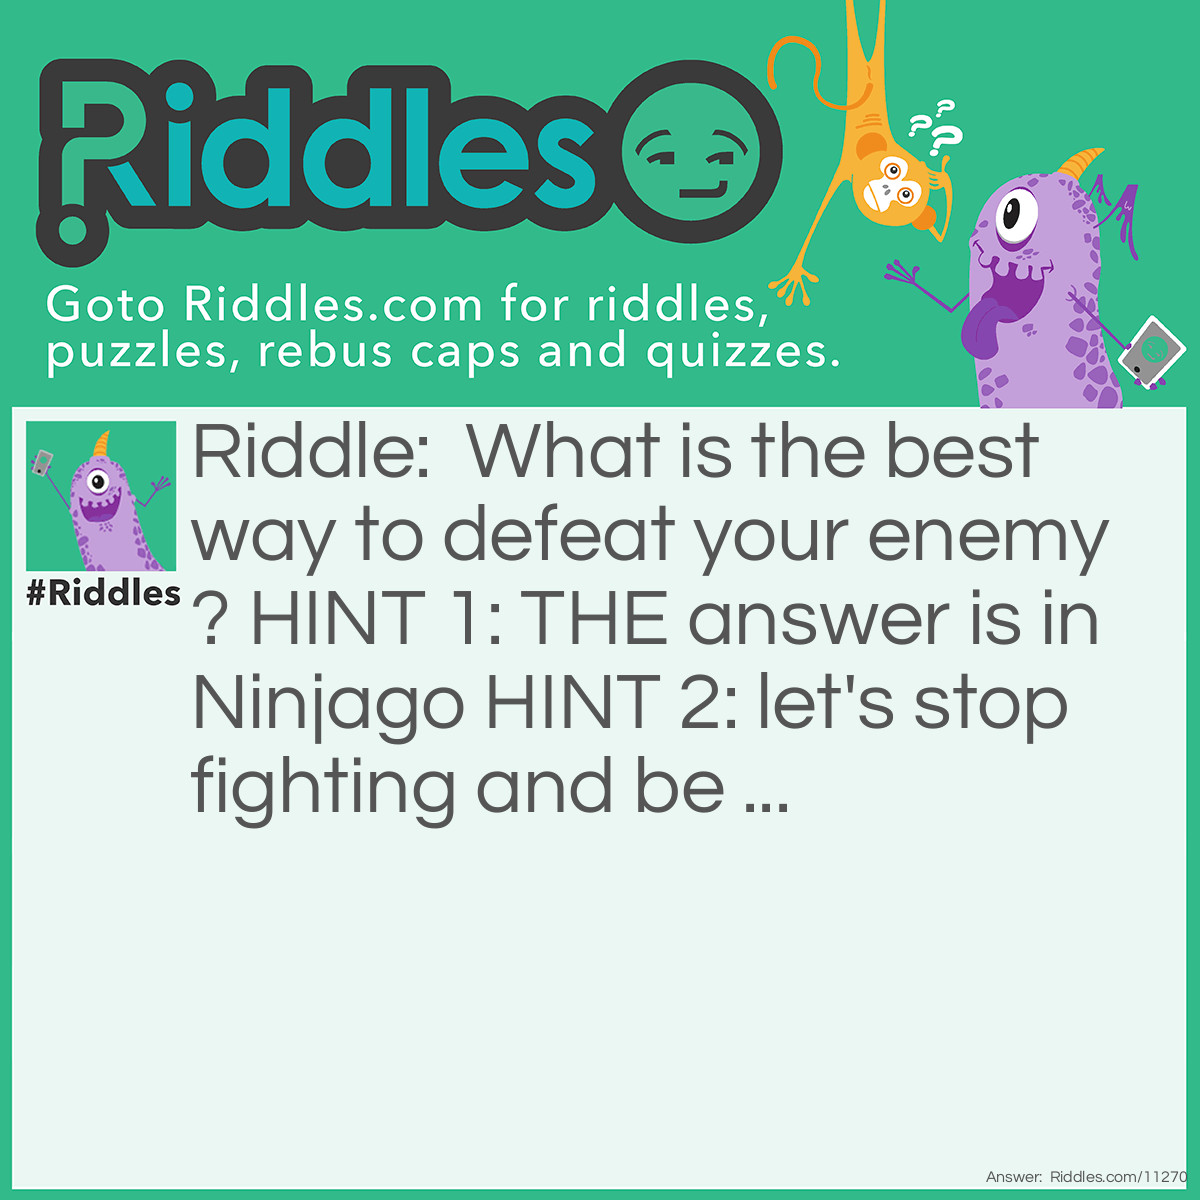 Riddle: What is the best way to defeat your enemy? HINT 1: THE answer is in Ninjago HINT 2: let's stop fighting and be ... Answer: To make him your friend.